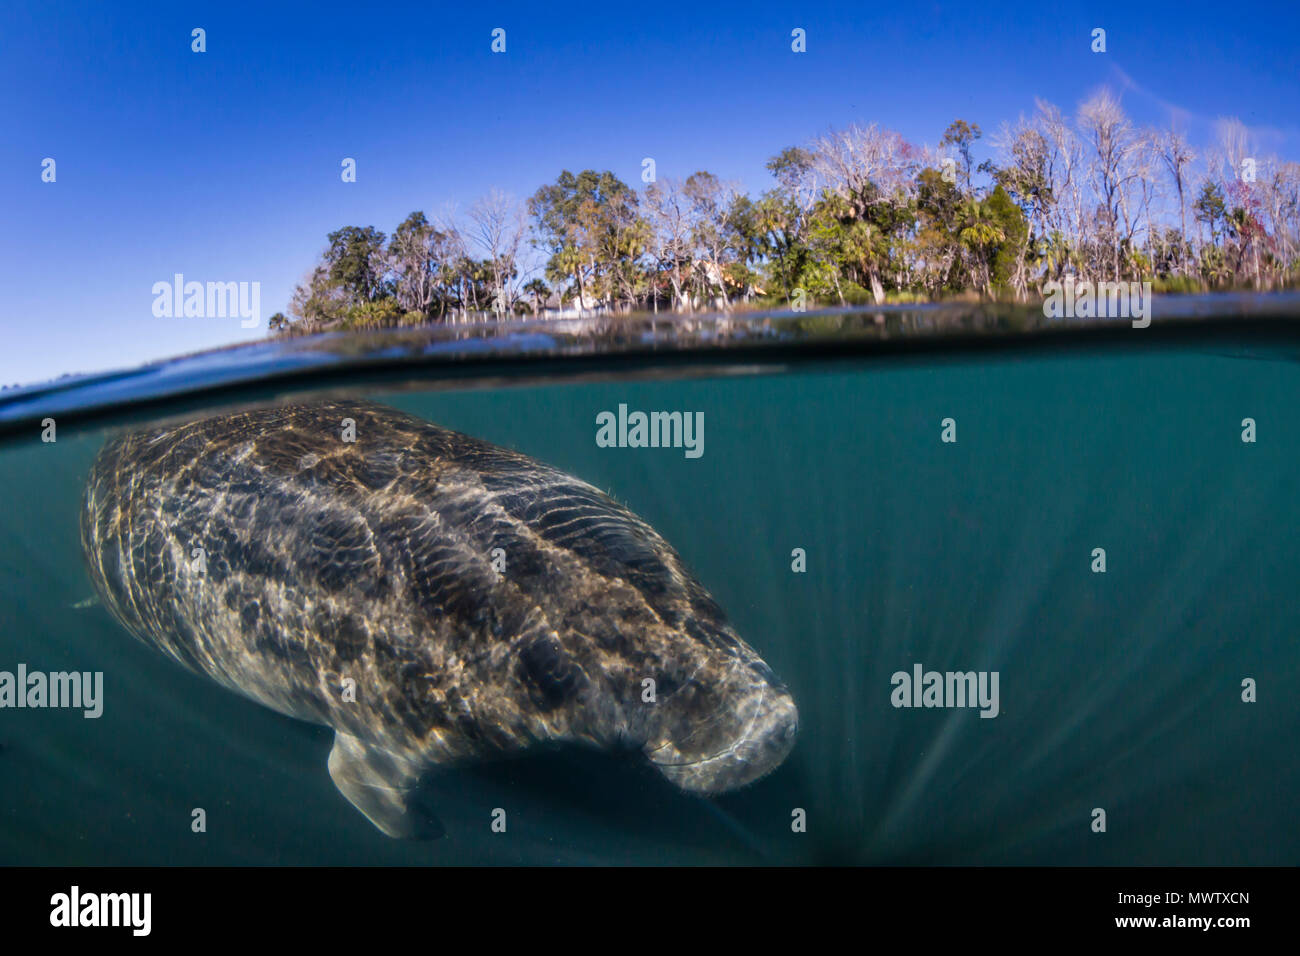 West Indian manatee (Trichechus manatus), half above and half below, Homosassa Springs, Florida, United States of America, North America Stock Photo